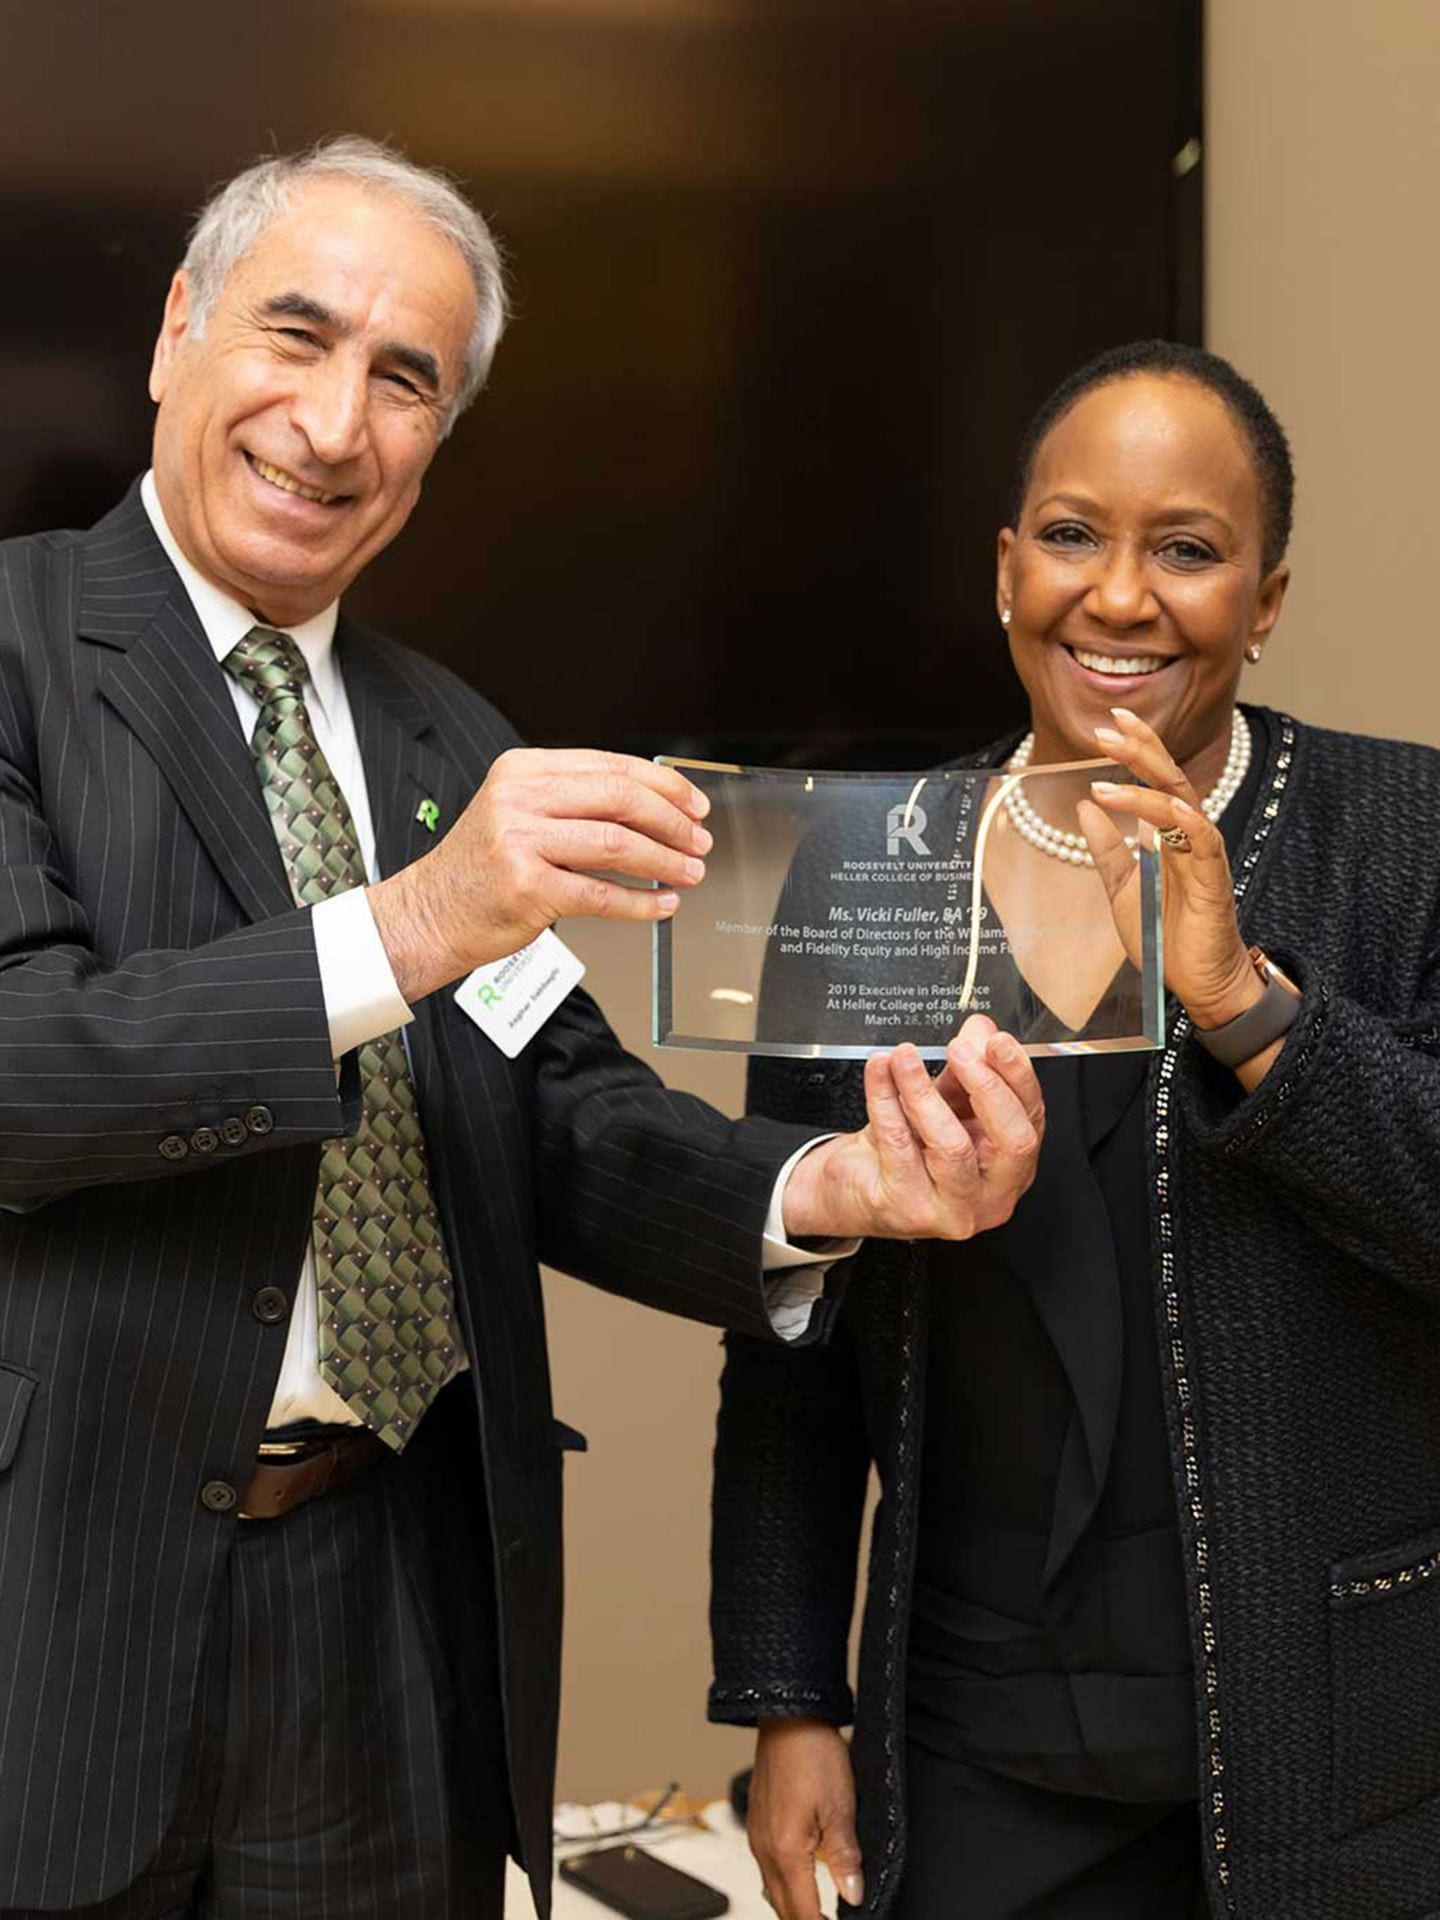 During Vicki Fuller's visit to Roosevelt University, Heller College of Business Dean Asghar Sabbaghi presented her with an award recognizing her storied career and contributions.